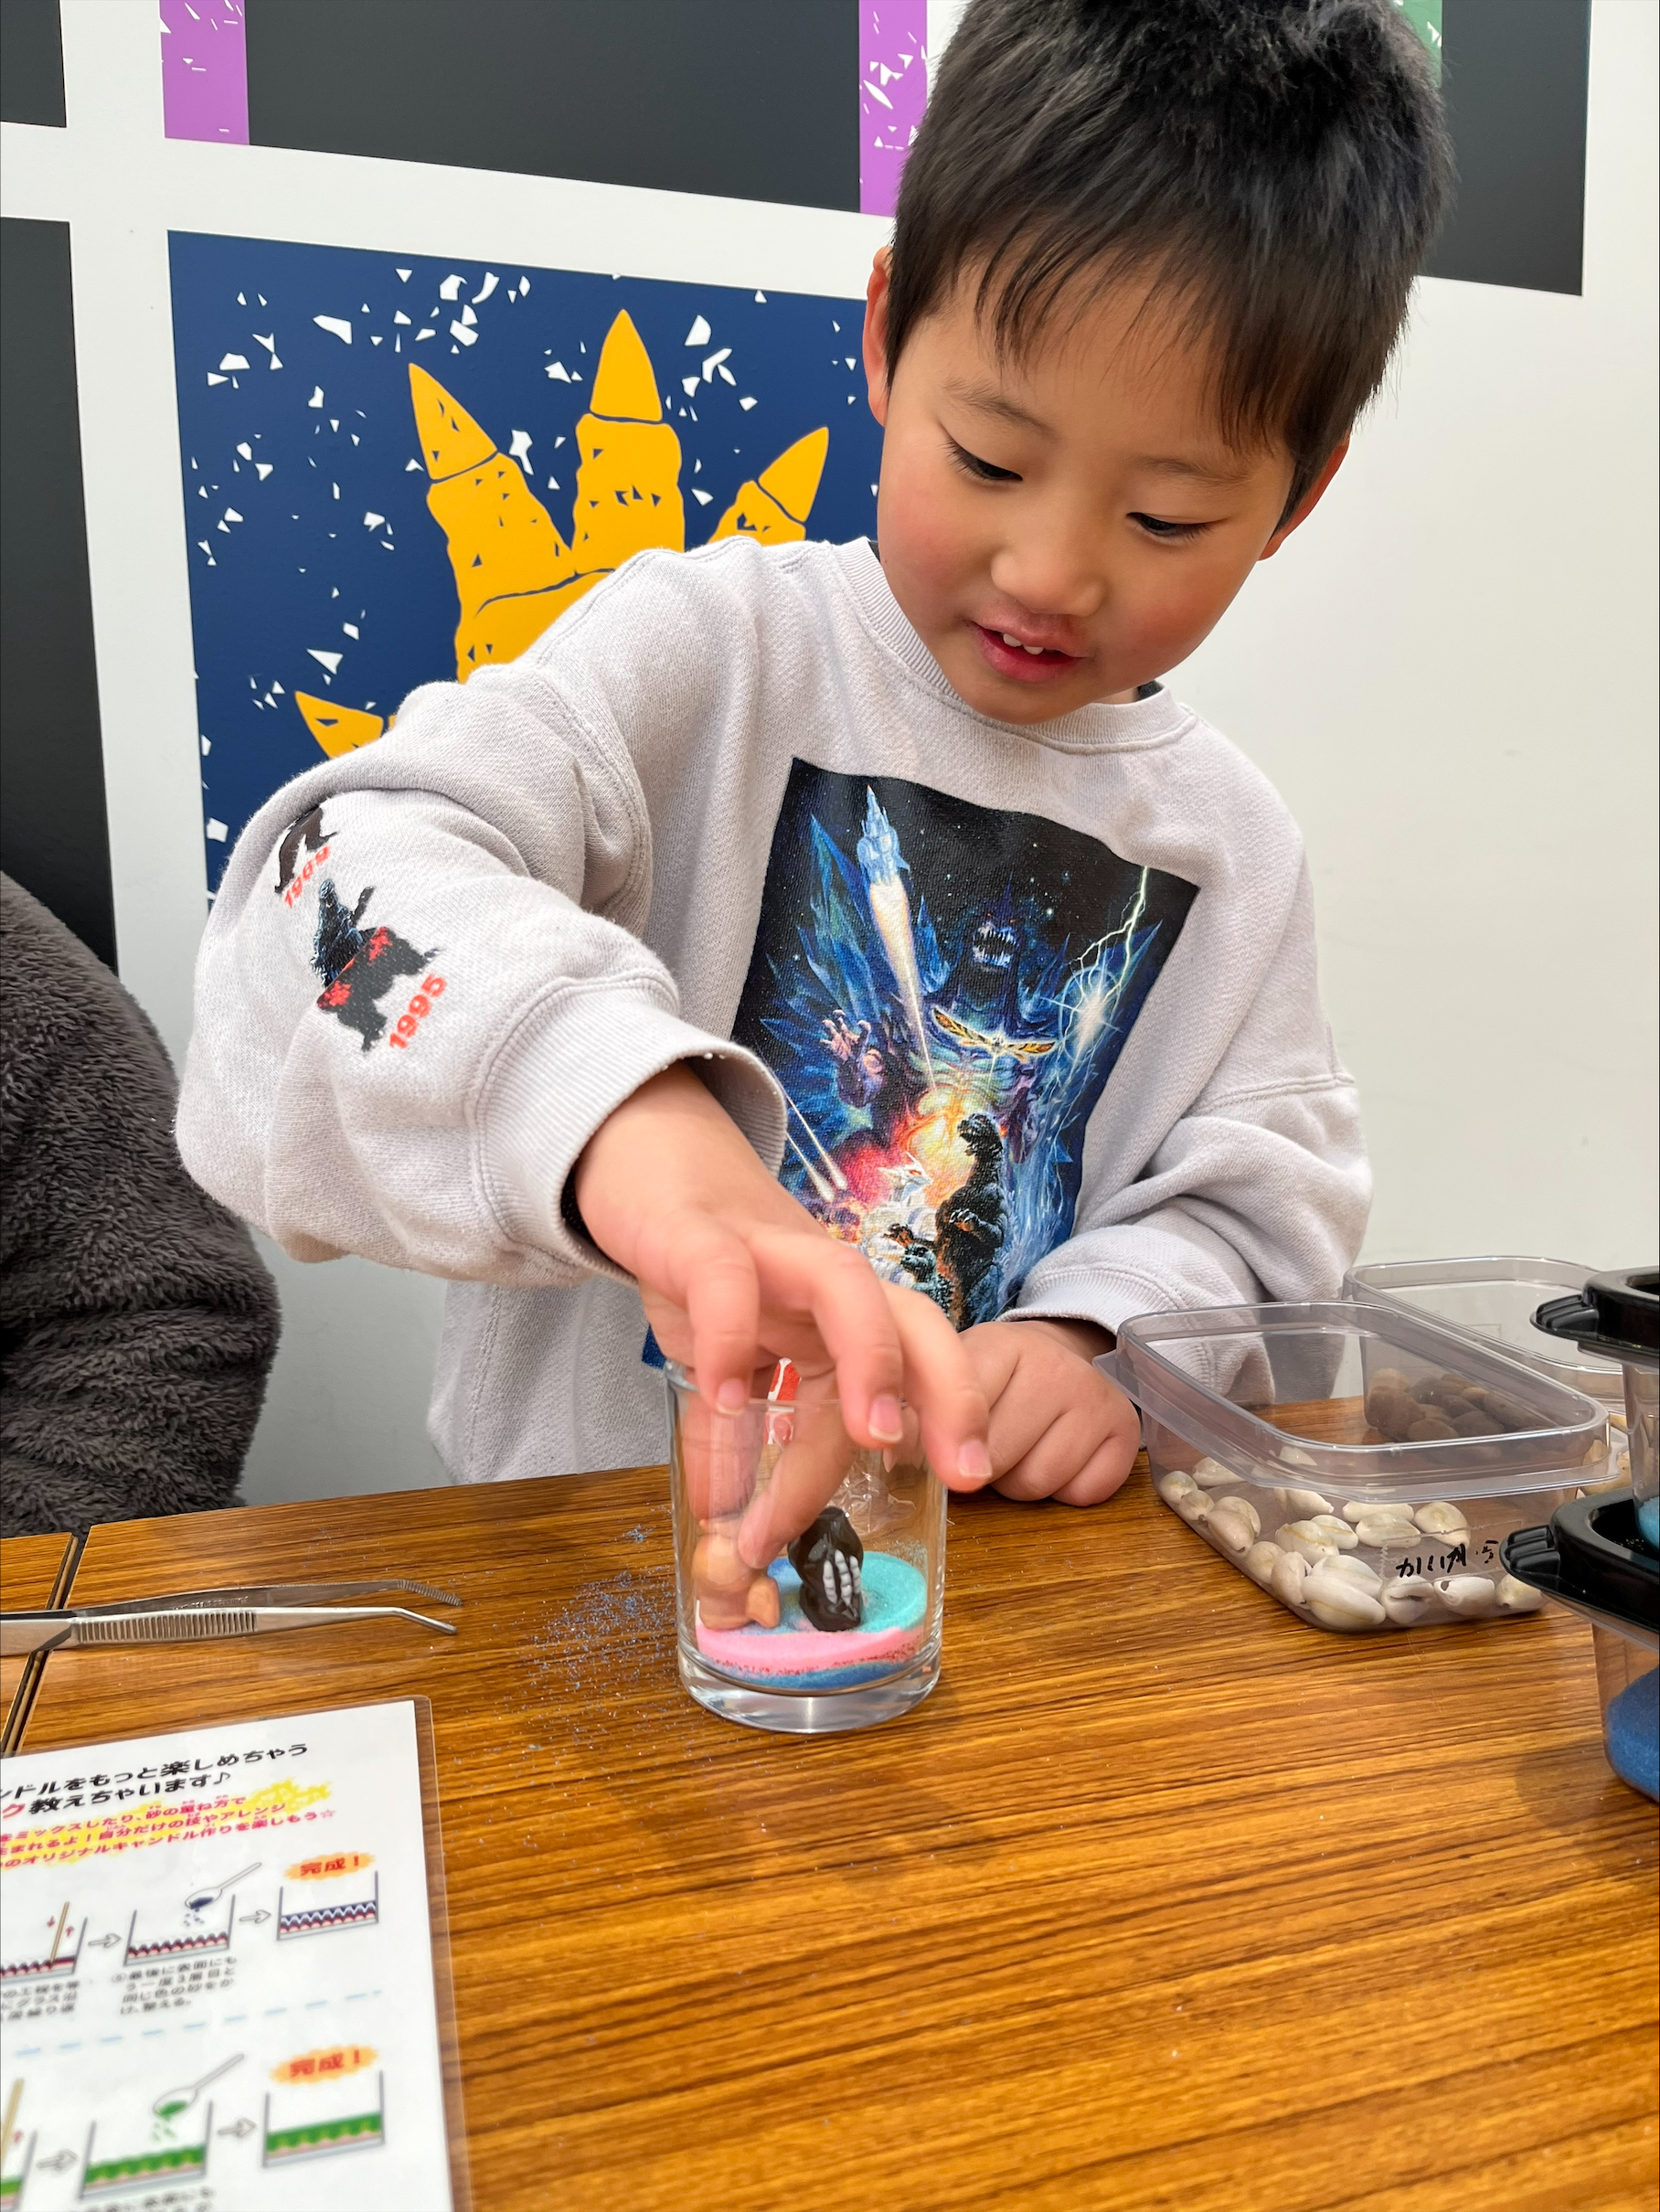 Slime coloring experience is very popular! [Dragon Quest Island